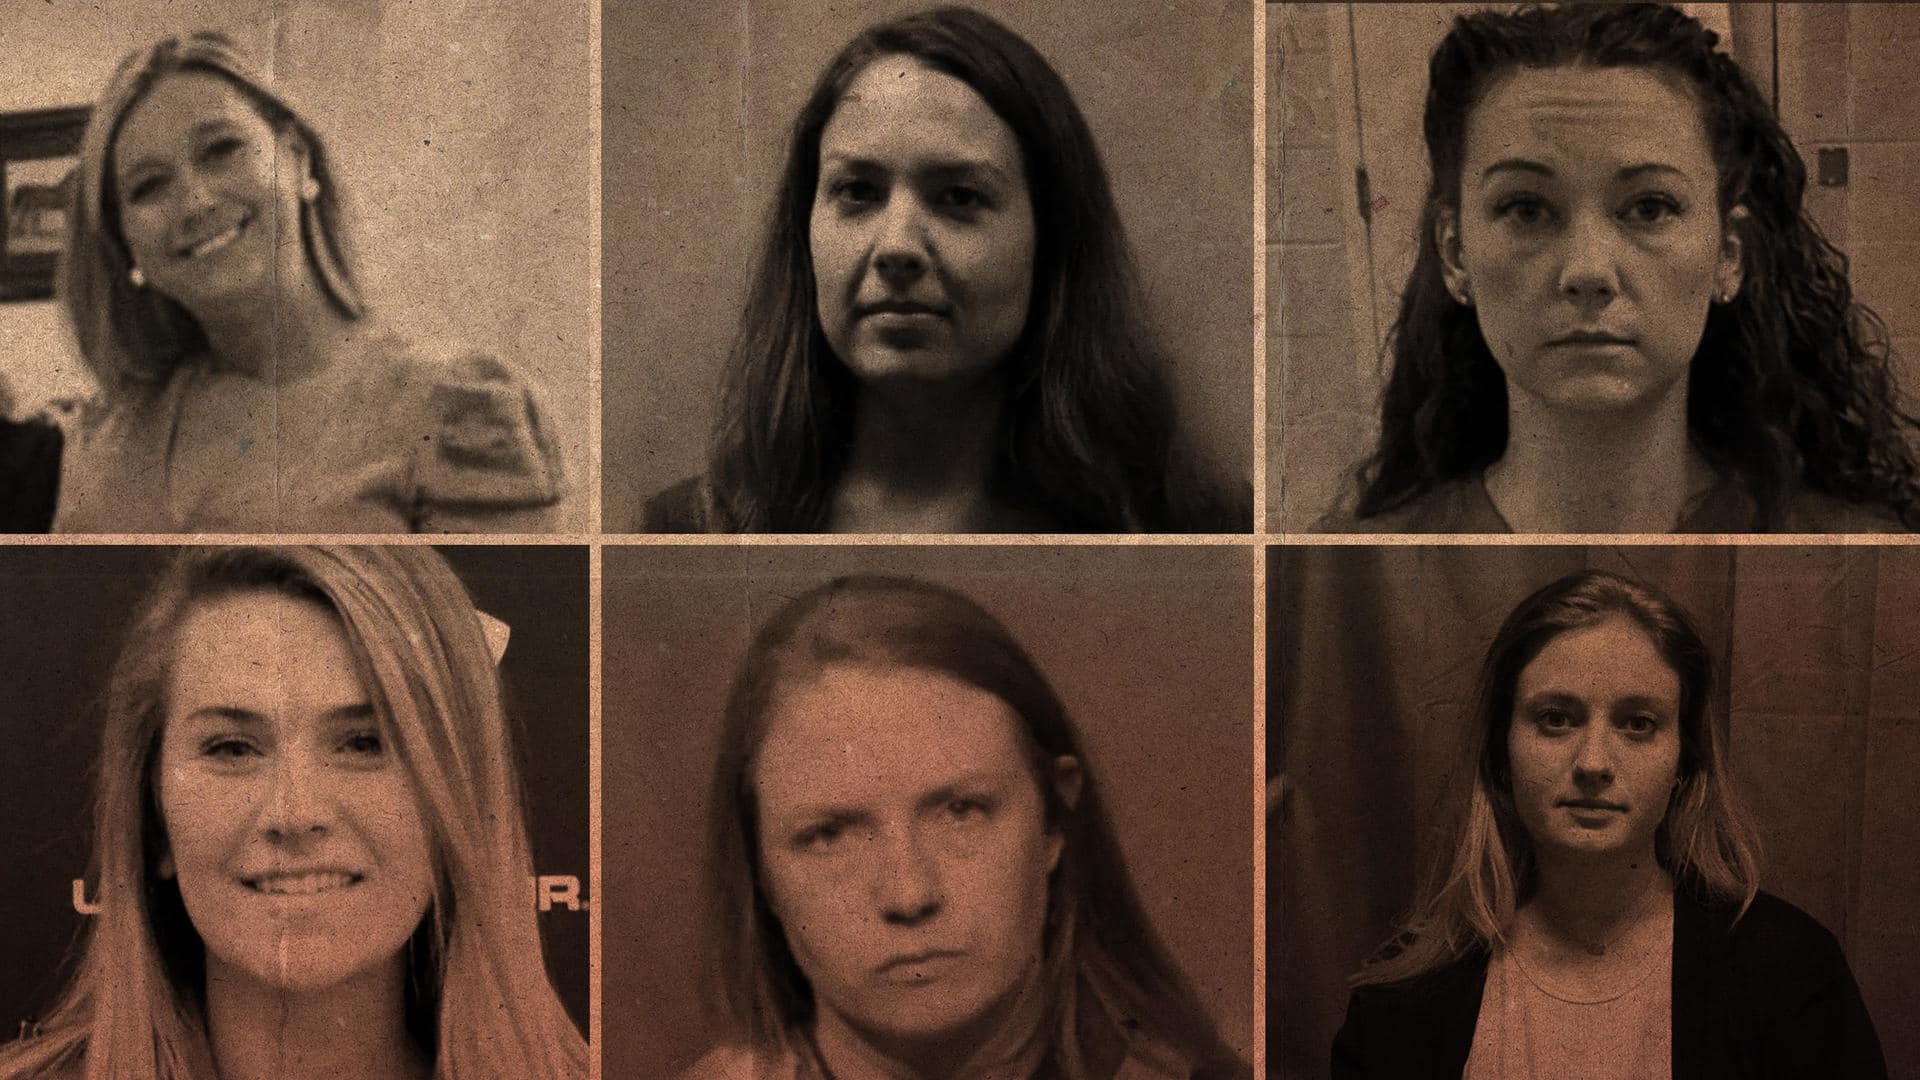 US: 6 female teachers arrested for sexual misconduct with students